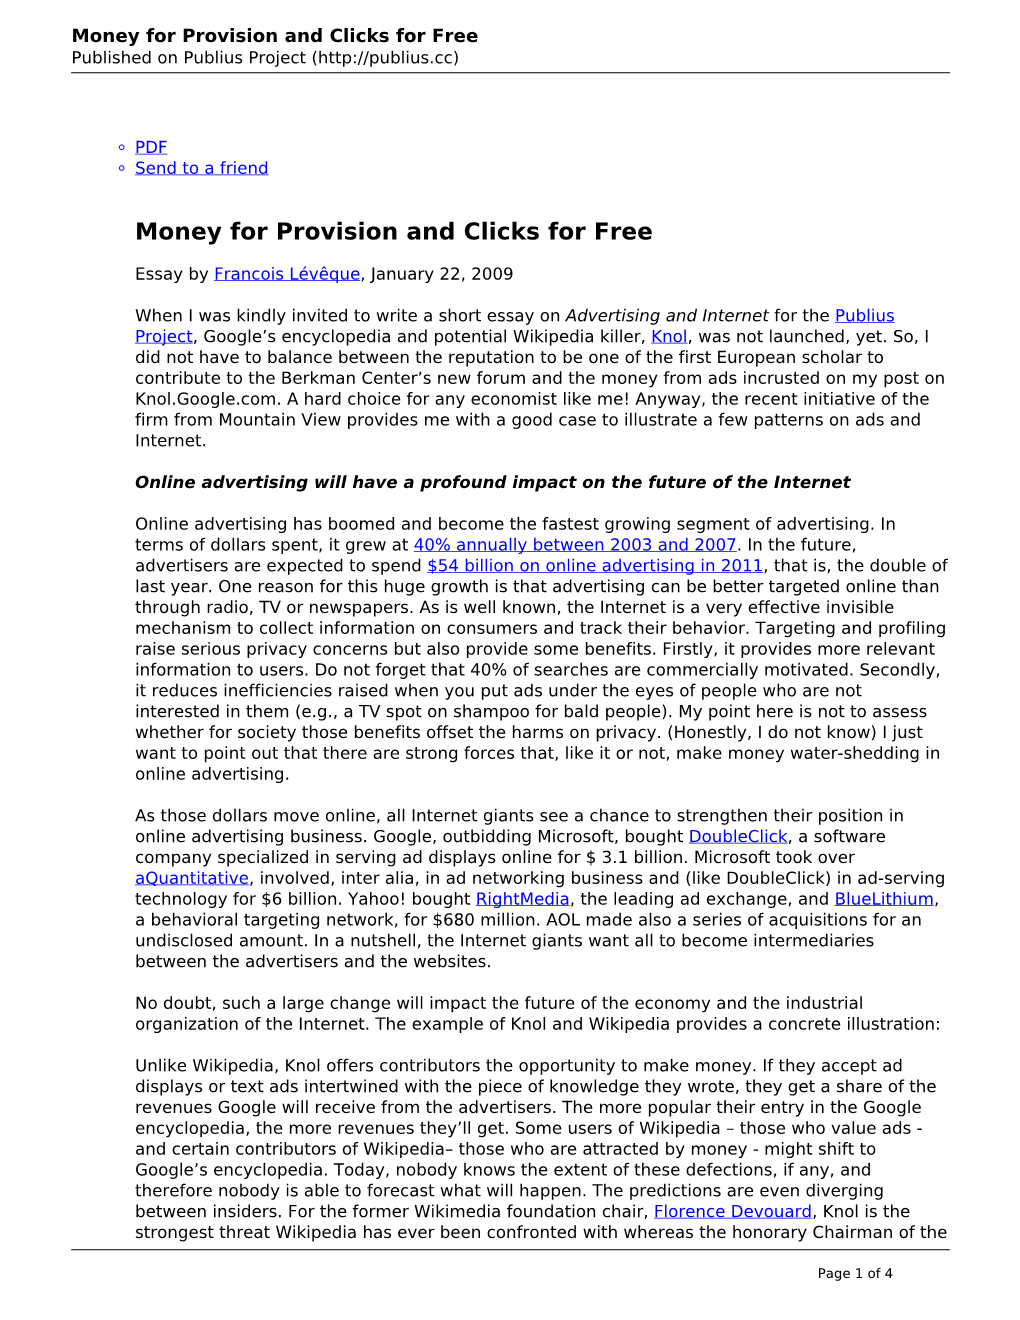 Money for Provision and Clicks for Free Published on Publius Project (